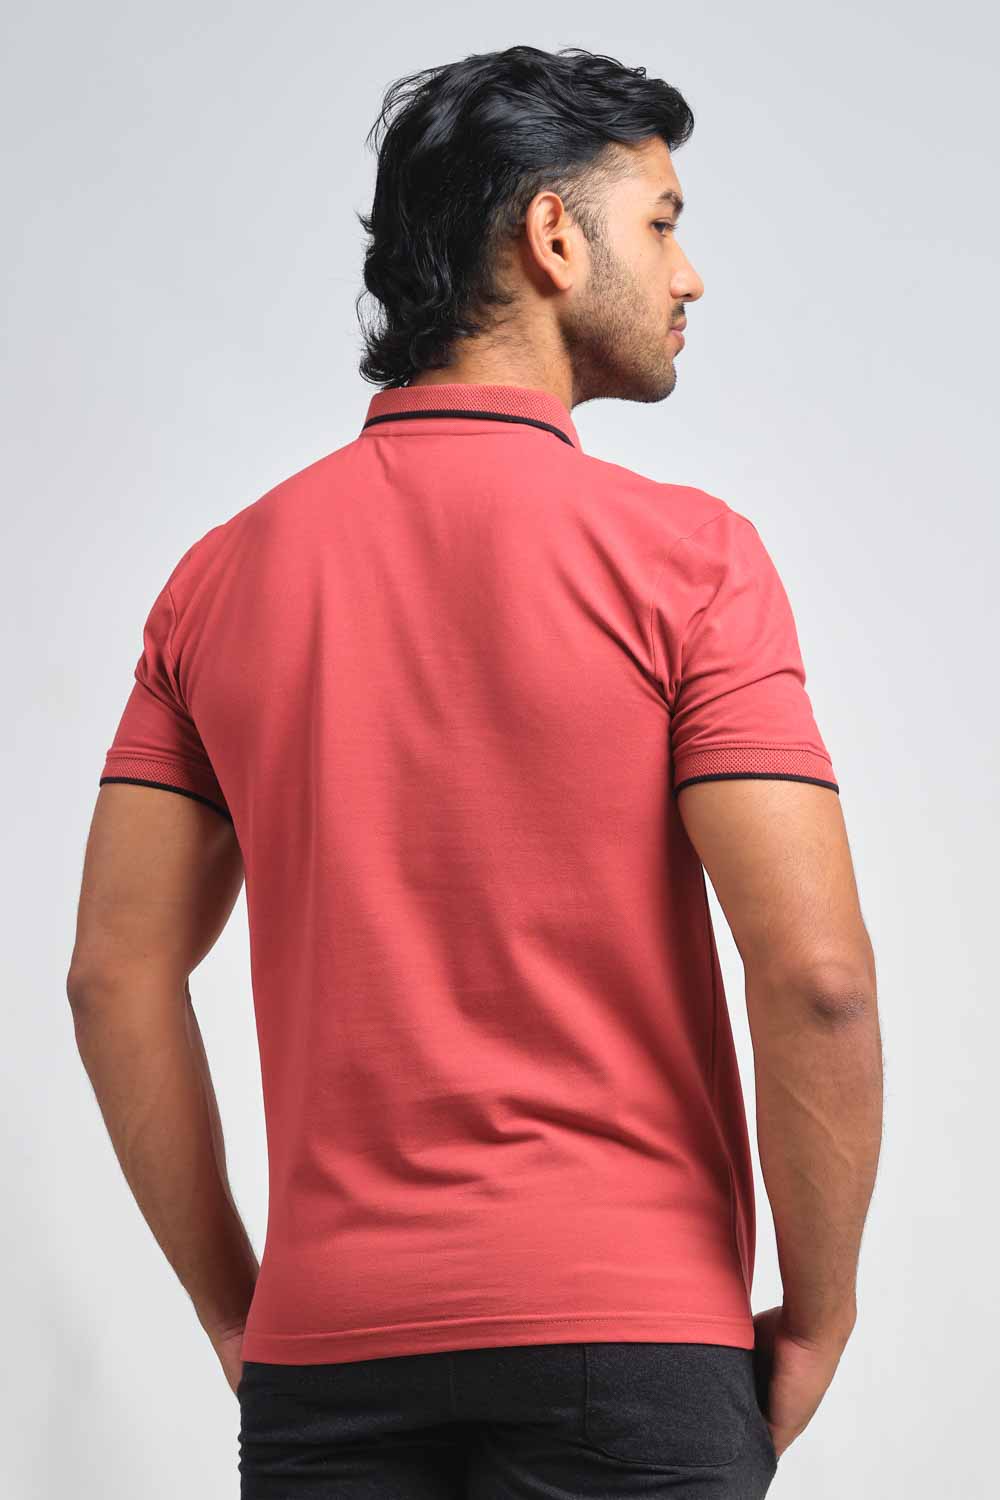 Right chest large ST82 silicon print - Luxury Premium cotton, Slim fit polo T-shirt